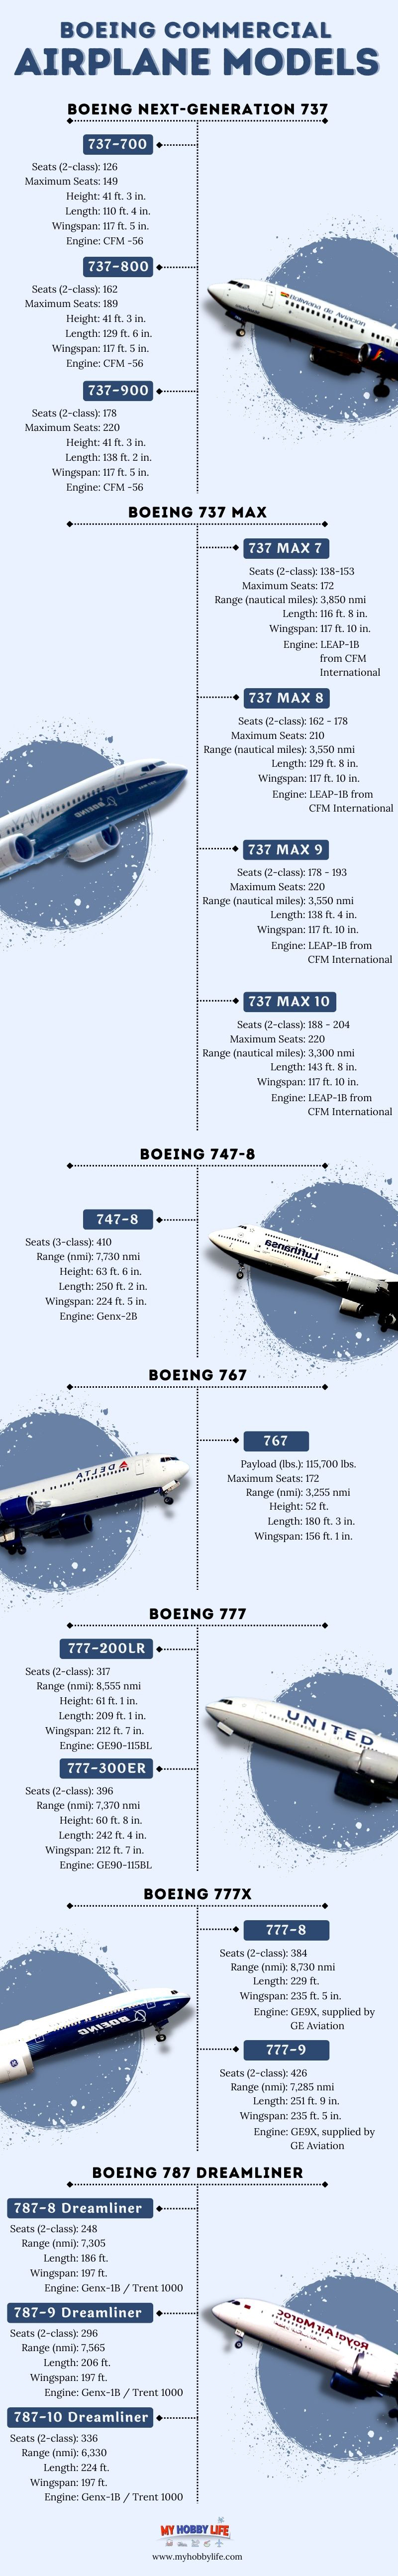 Boeing Commercial Airplane Models